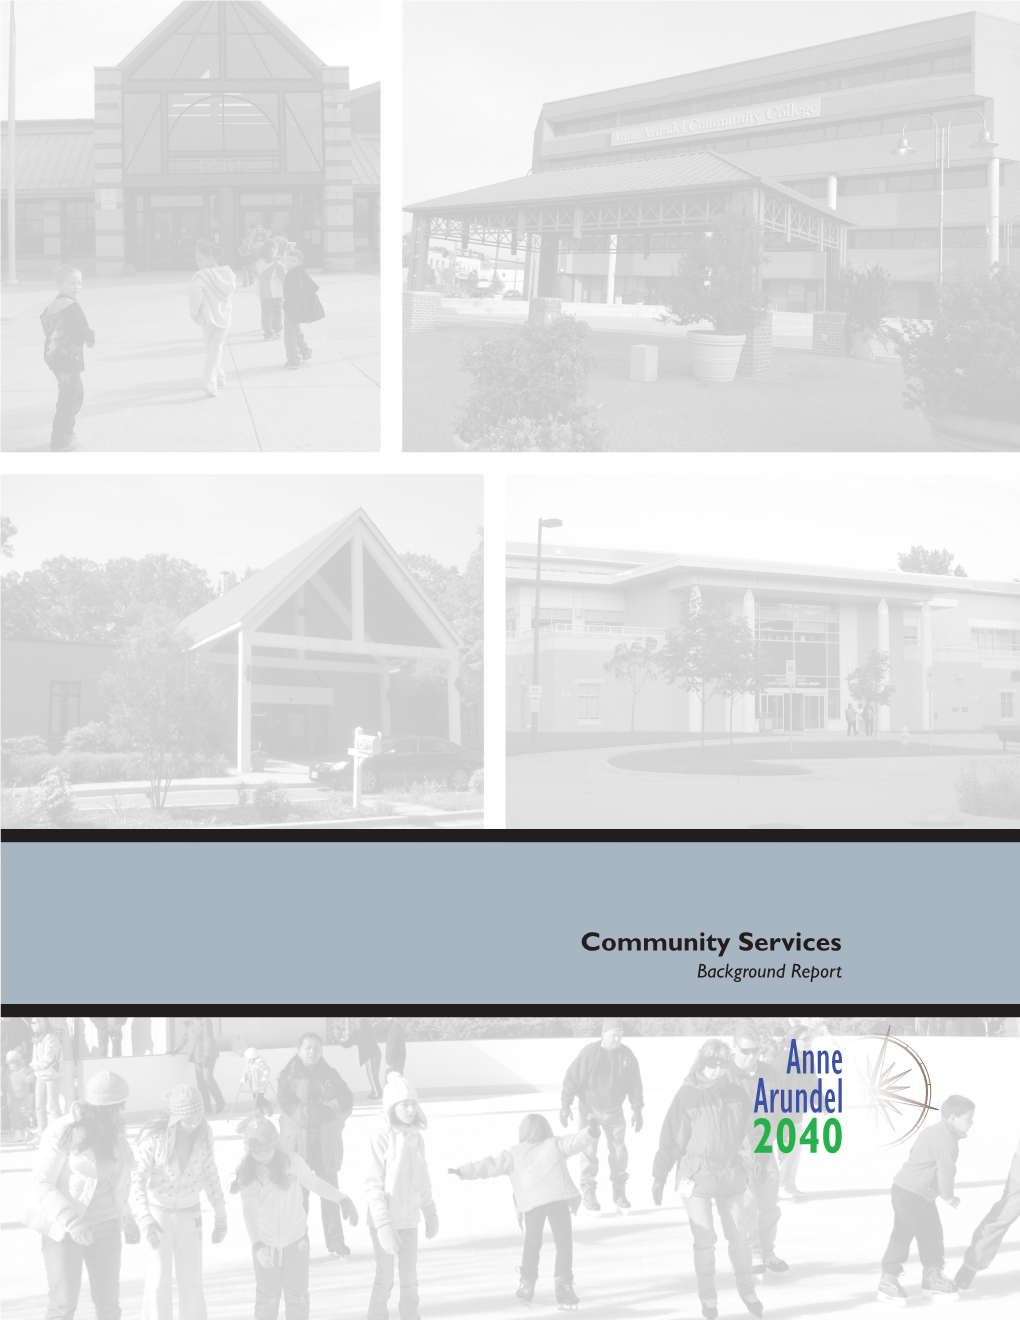 Community Services Background Report